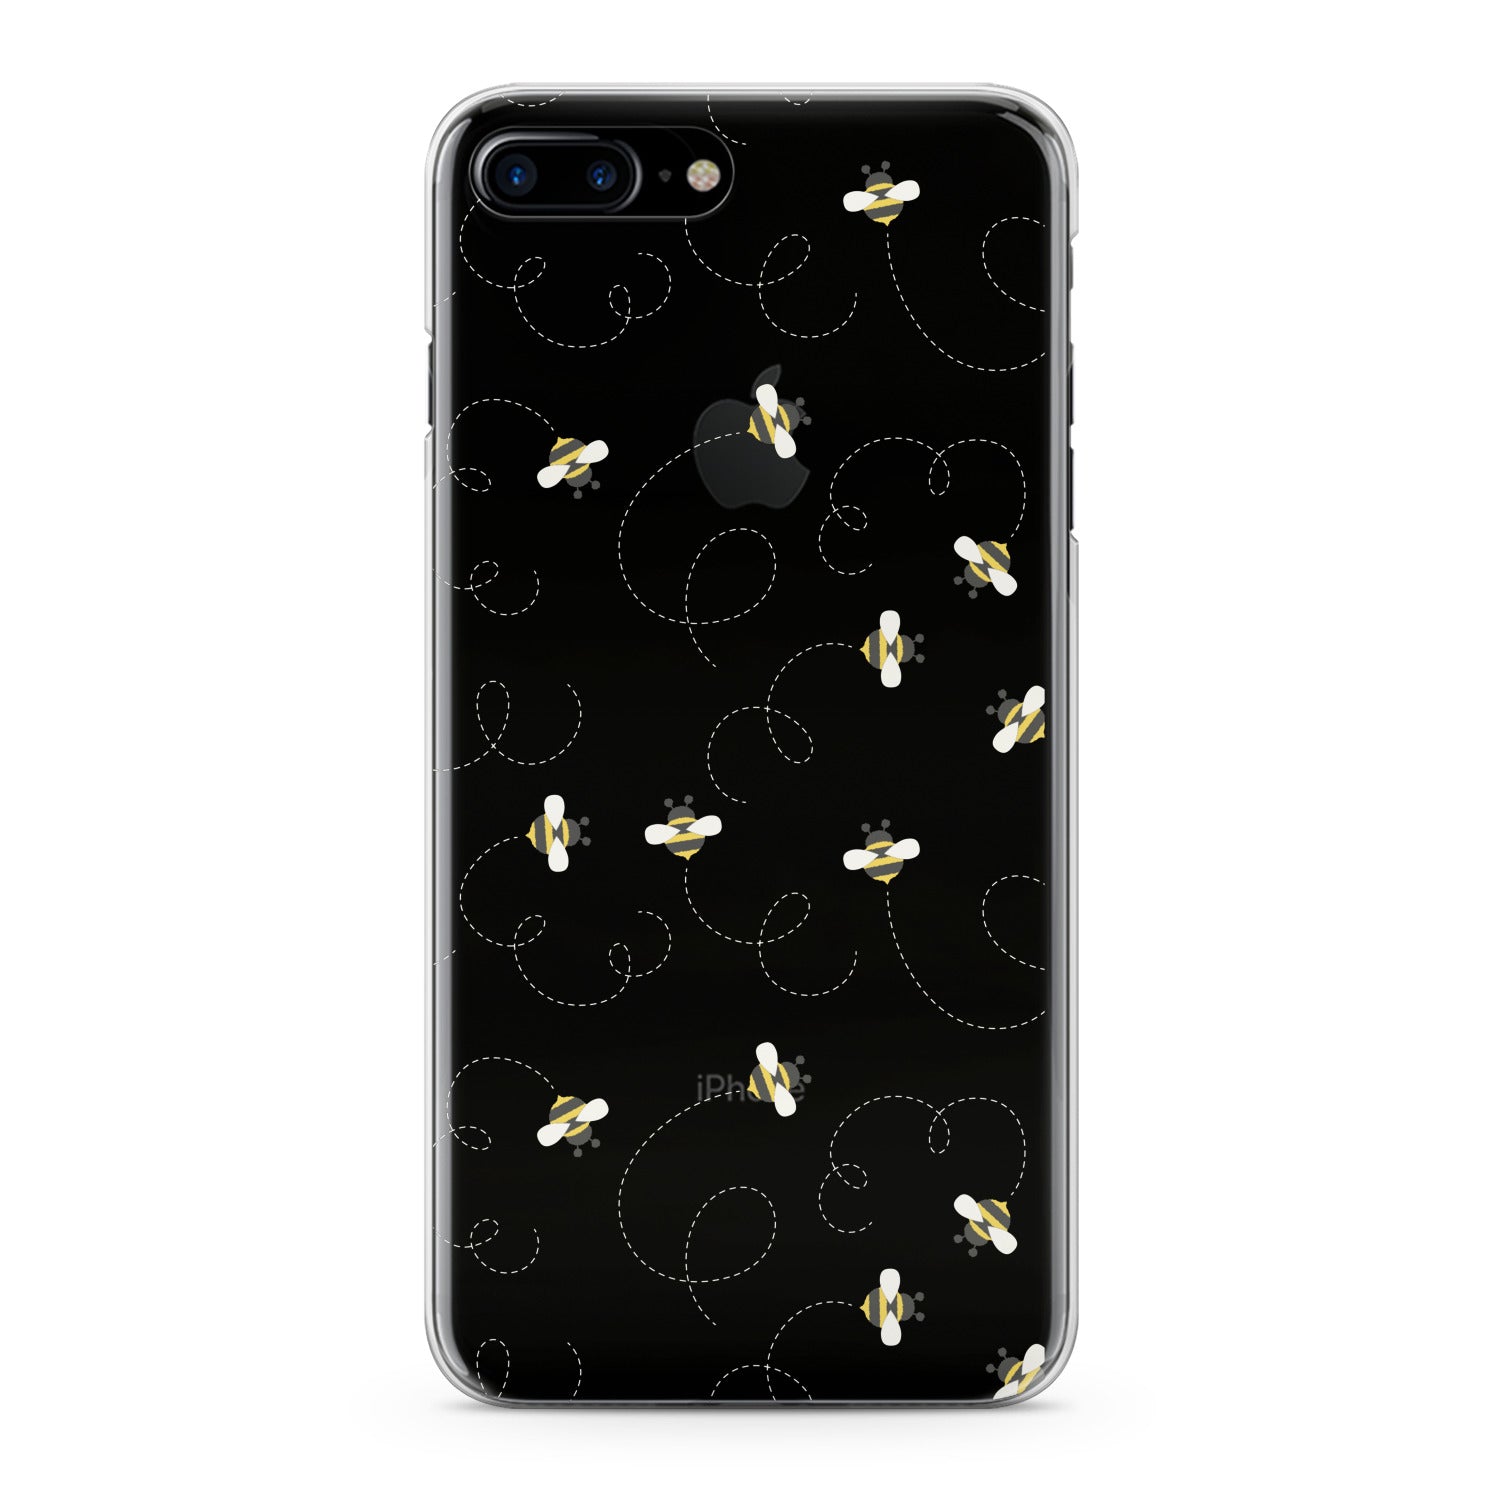 Lex Altern Small Bee Pattern Phone Case for your iPhone & Android phone.